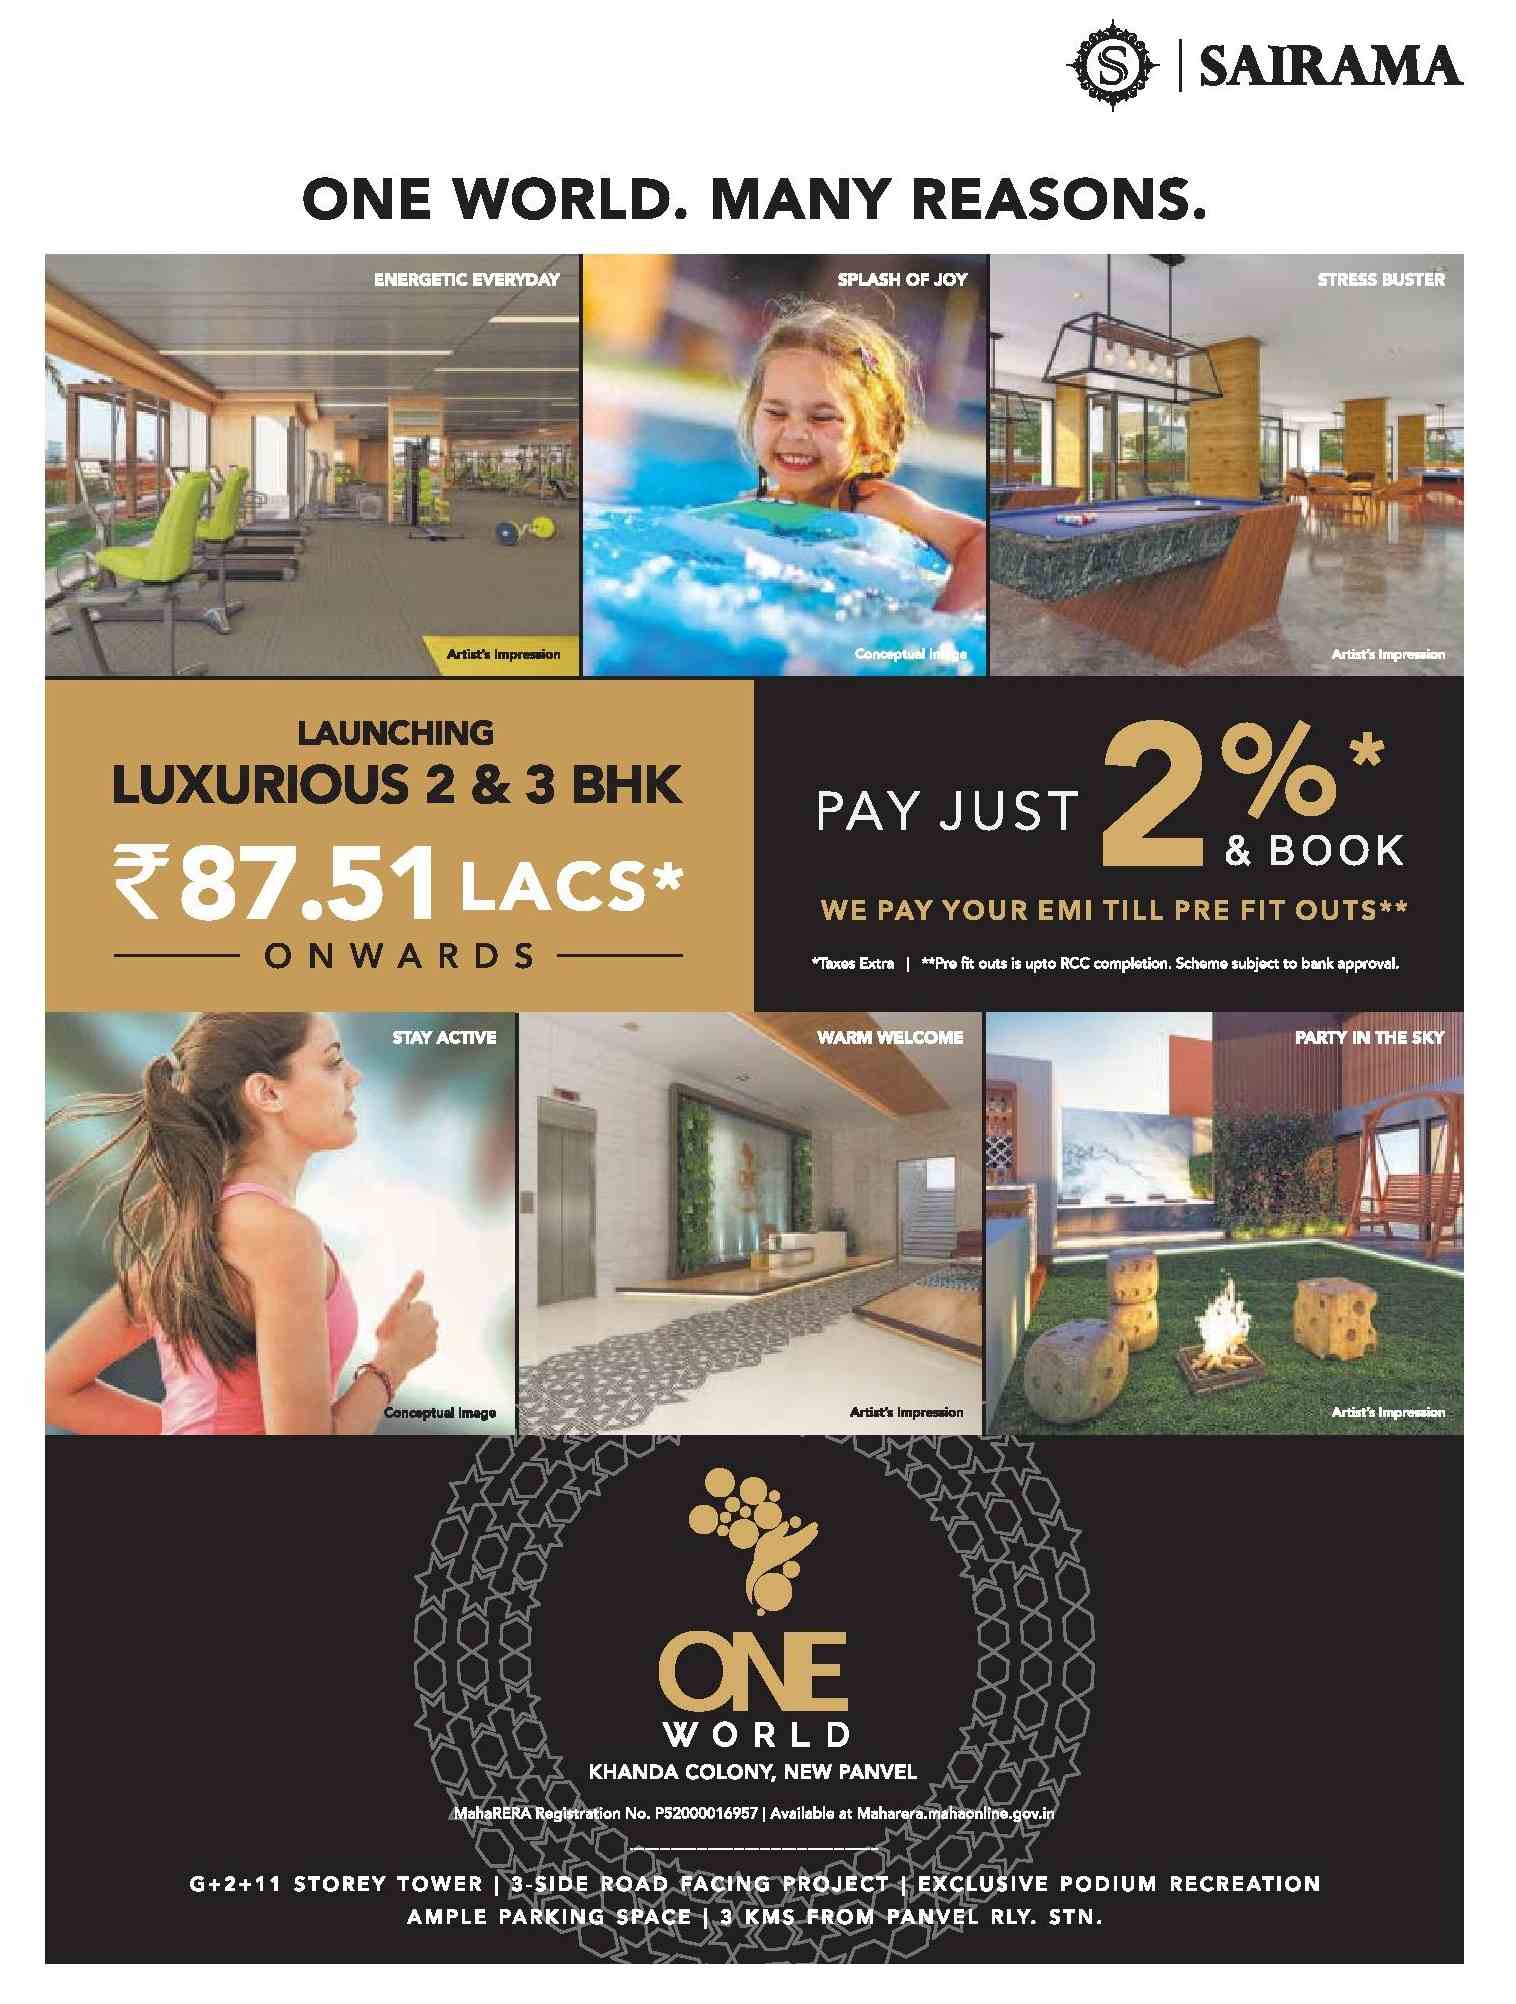 Pay just 2% and book your abode at Sairama One World in Navi Mumbai Update